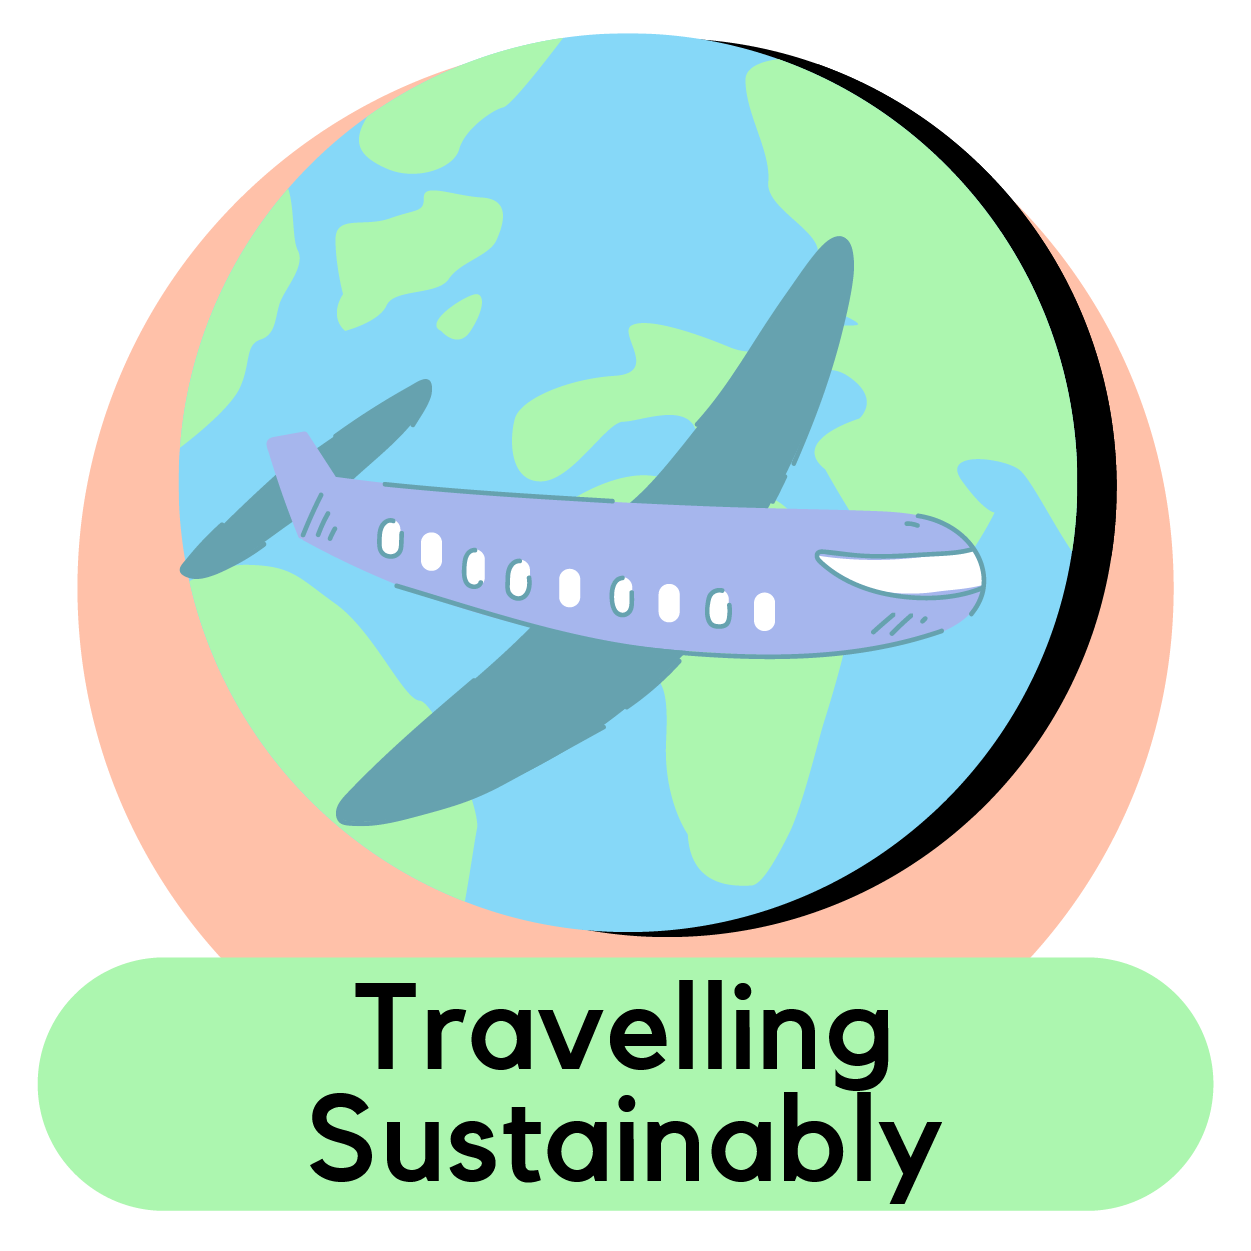 Travelling Sustainably